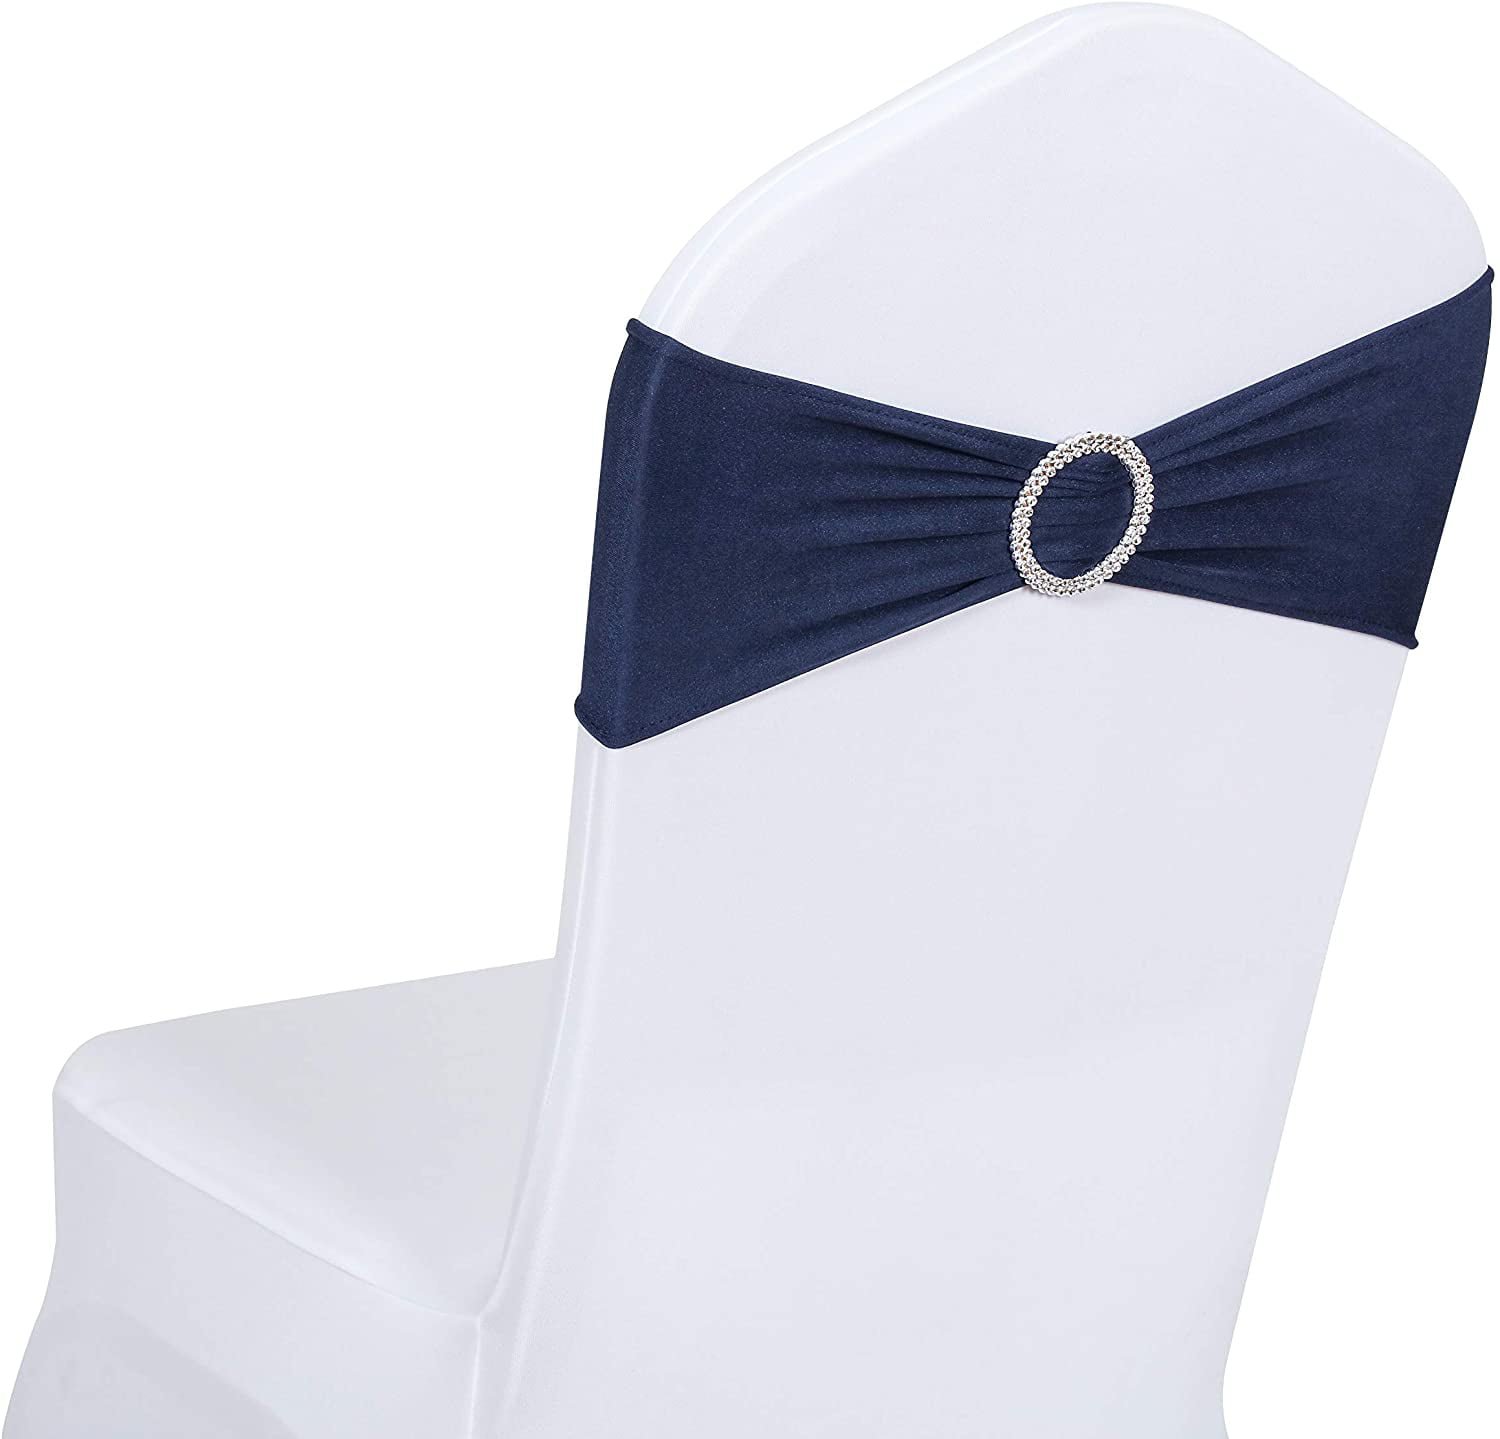 20/50pcs Spandex Stretch Wedding Chair Cover Sashes Bow Band Party Banquet Decor 